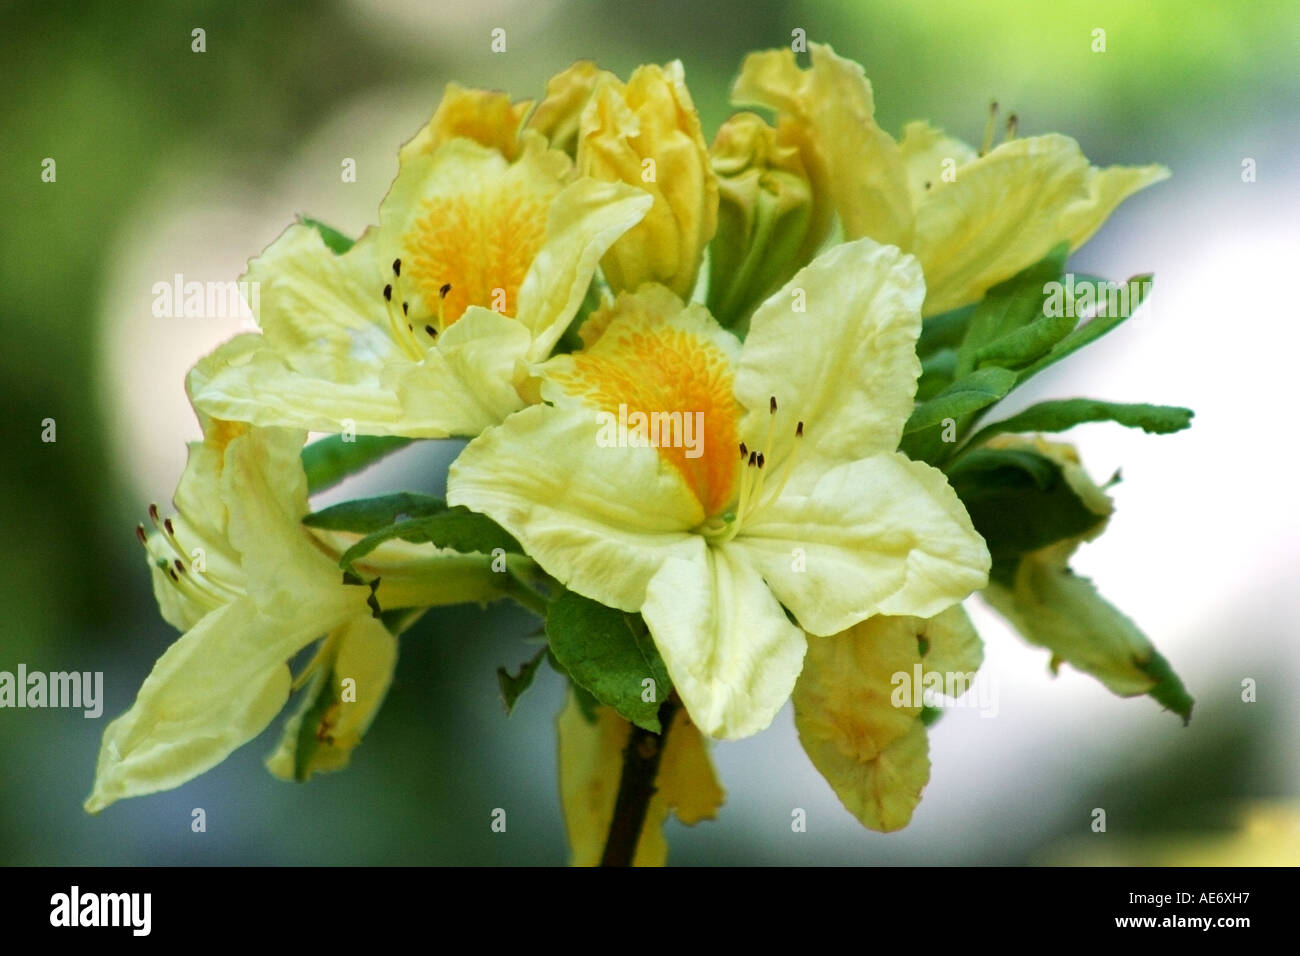 RHODODENDRON LUTEUM Yellow Rhododendron Flower Stock Photo